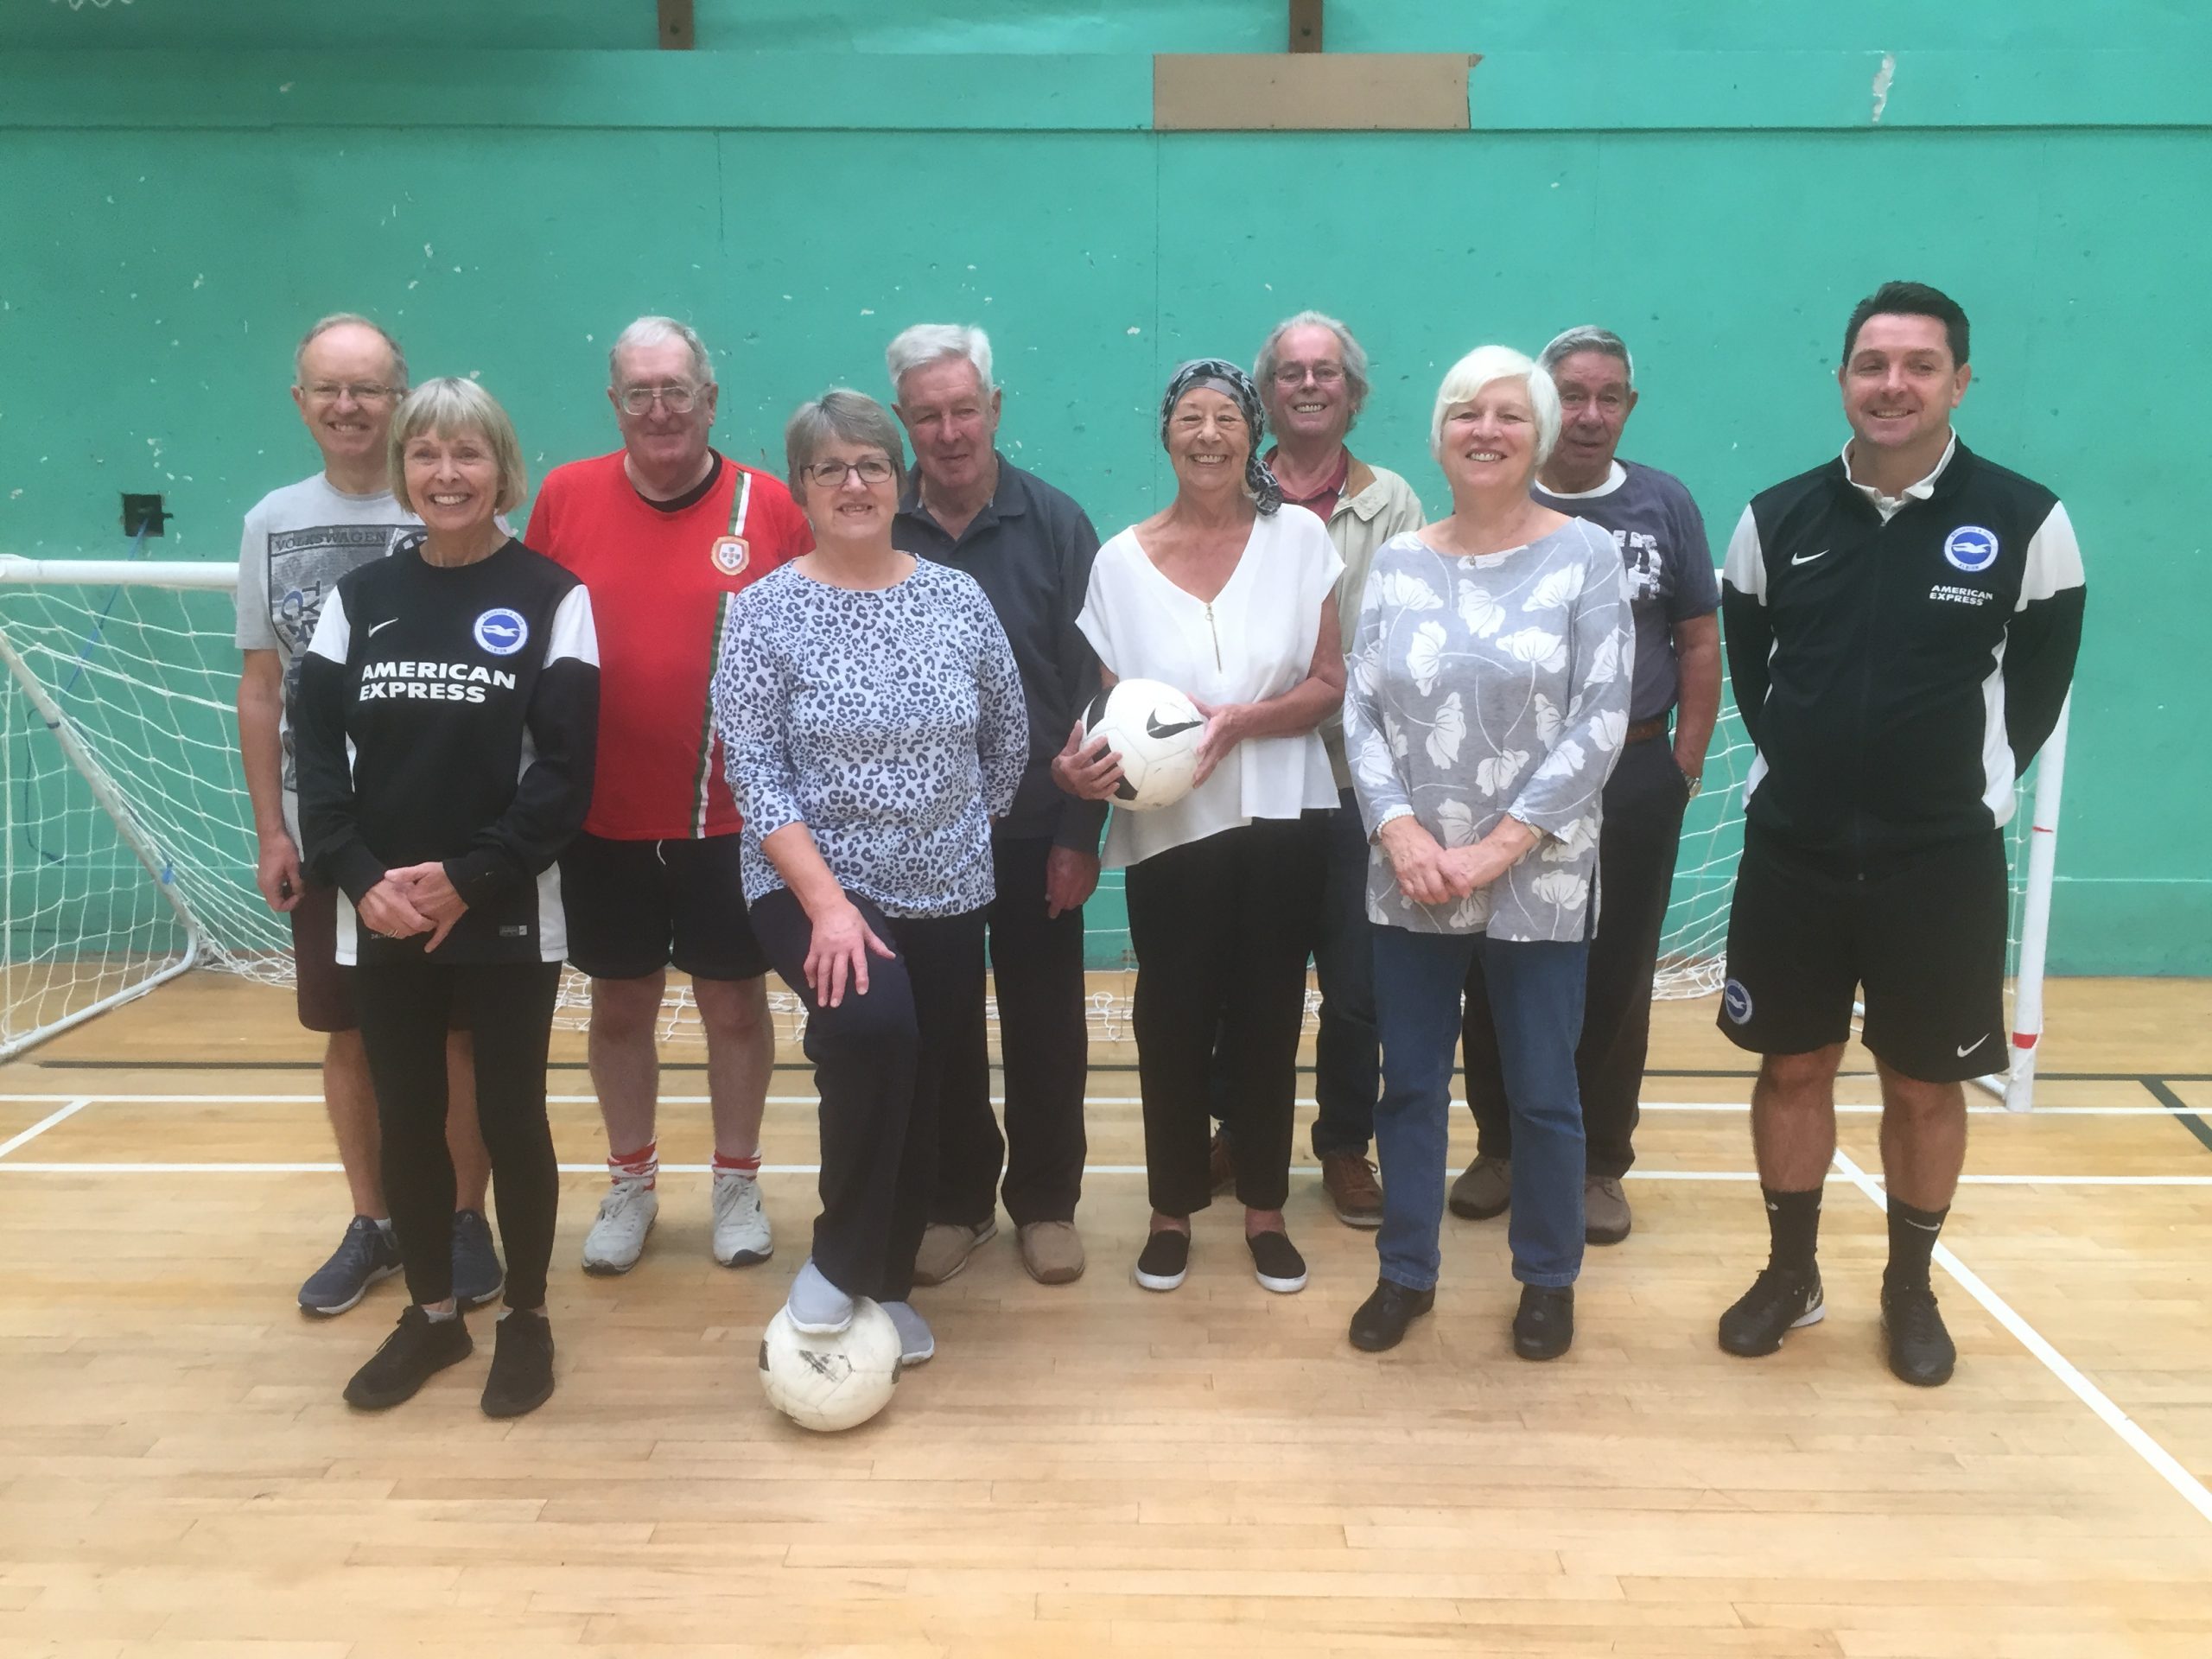 Walking football session is tackling impact of dementia